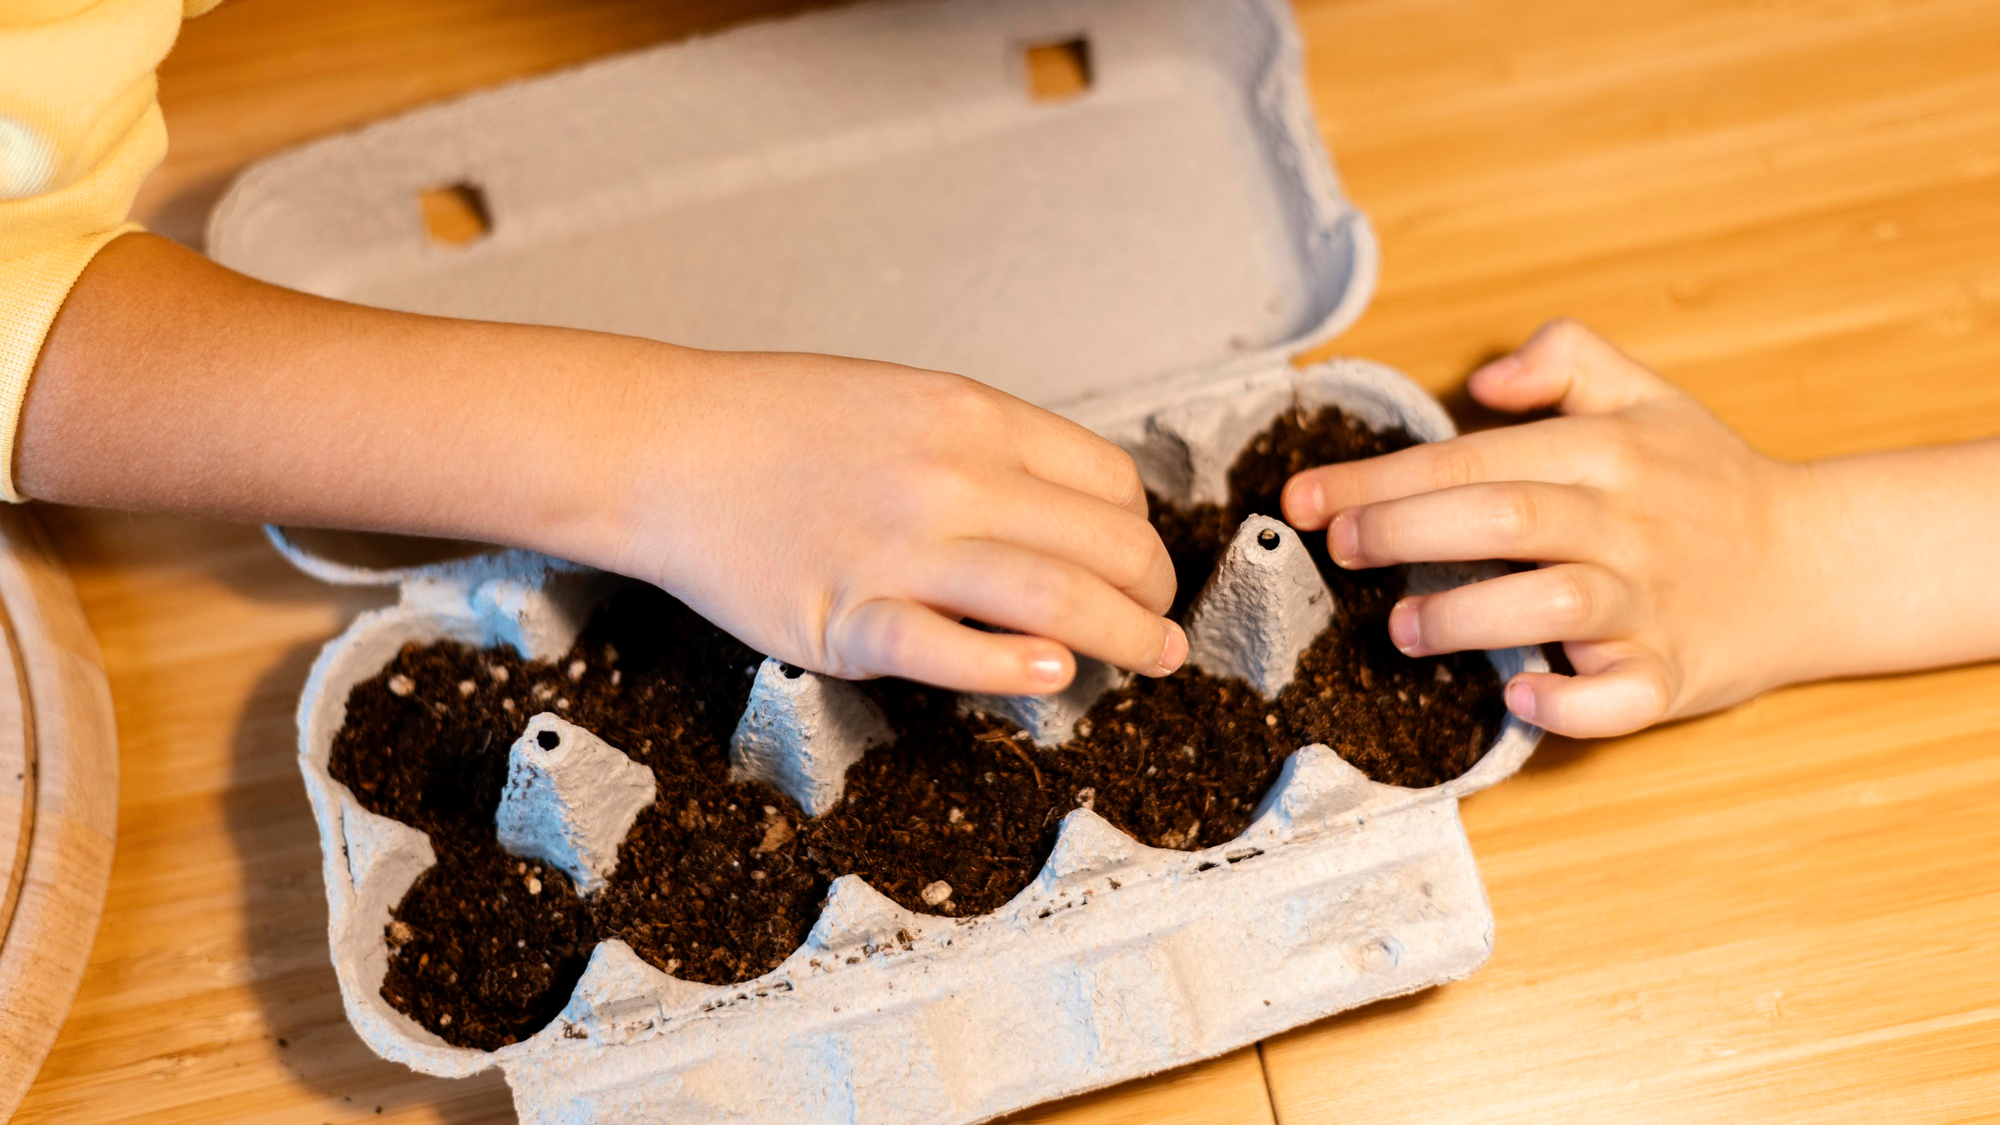 Spring Gardening Tips for Growing Your Own Produce From Seed to Harvest